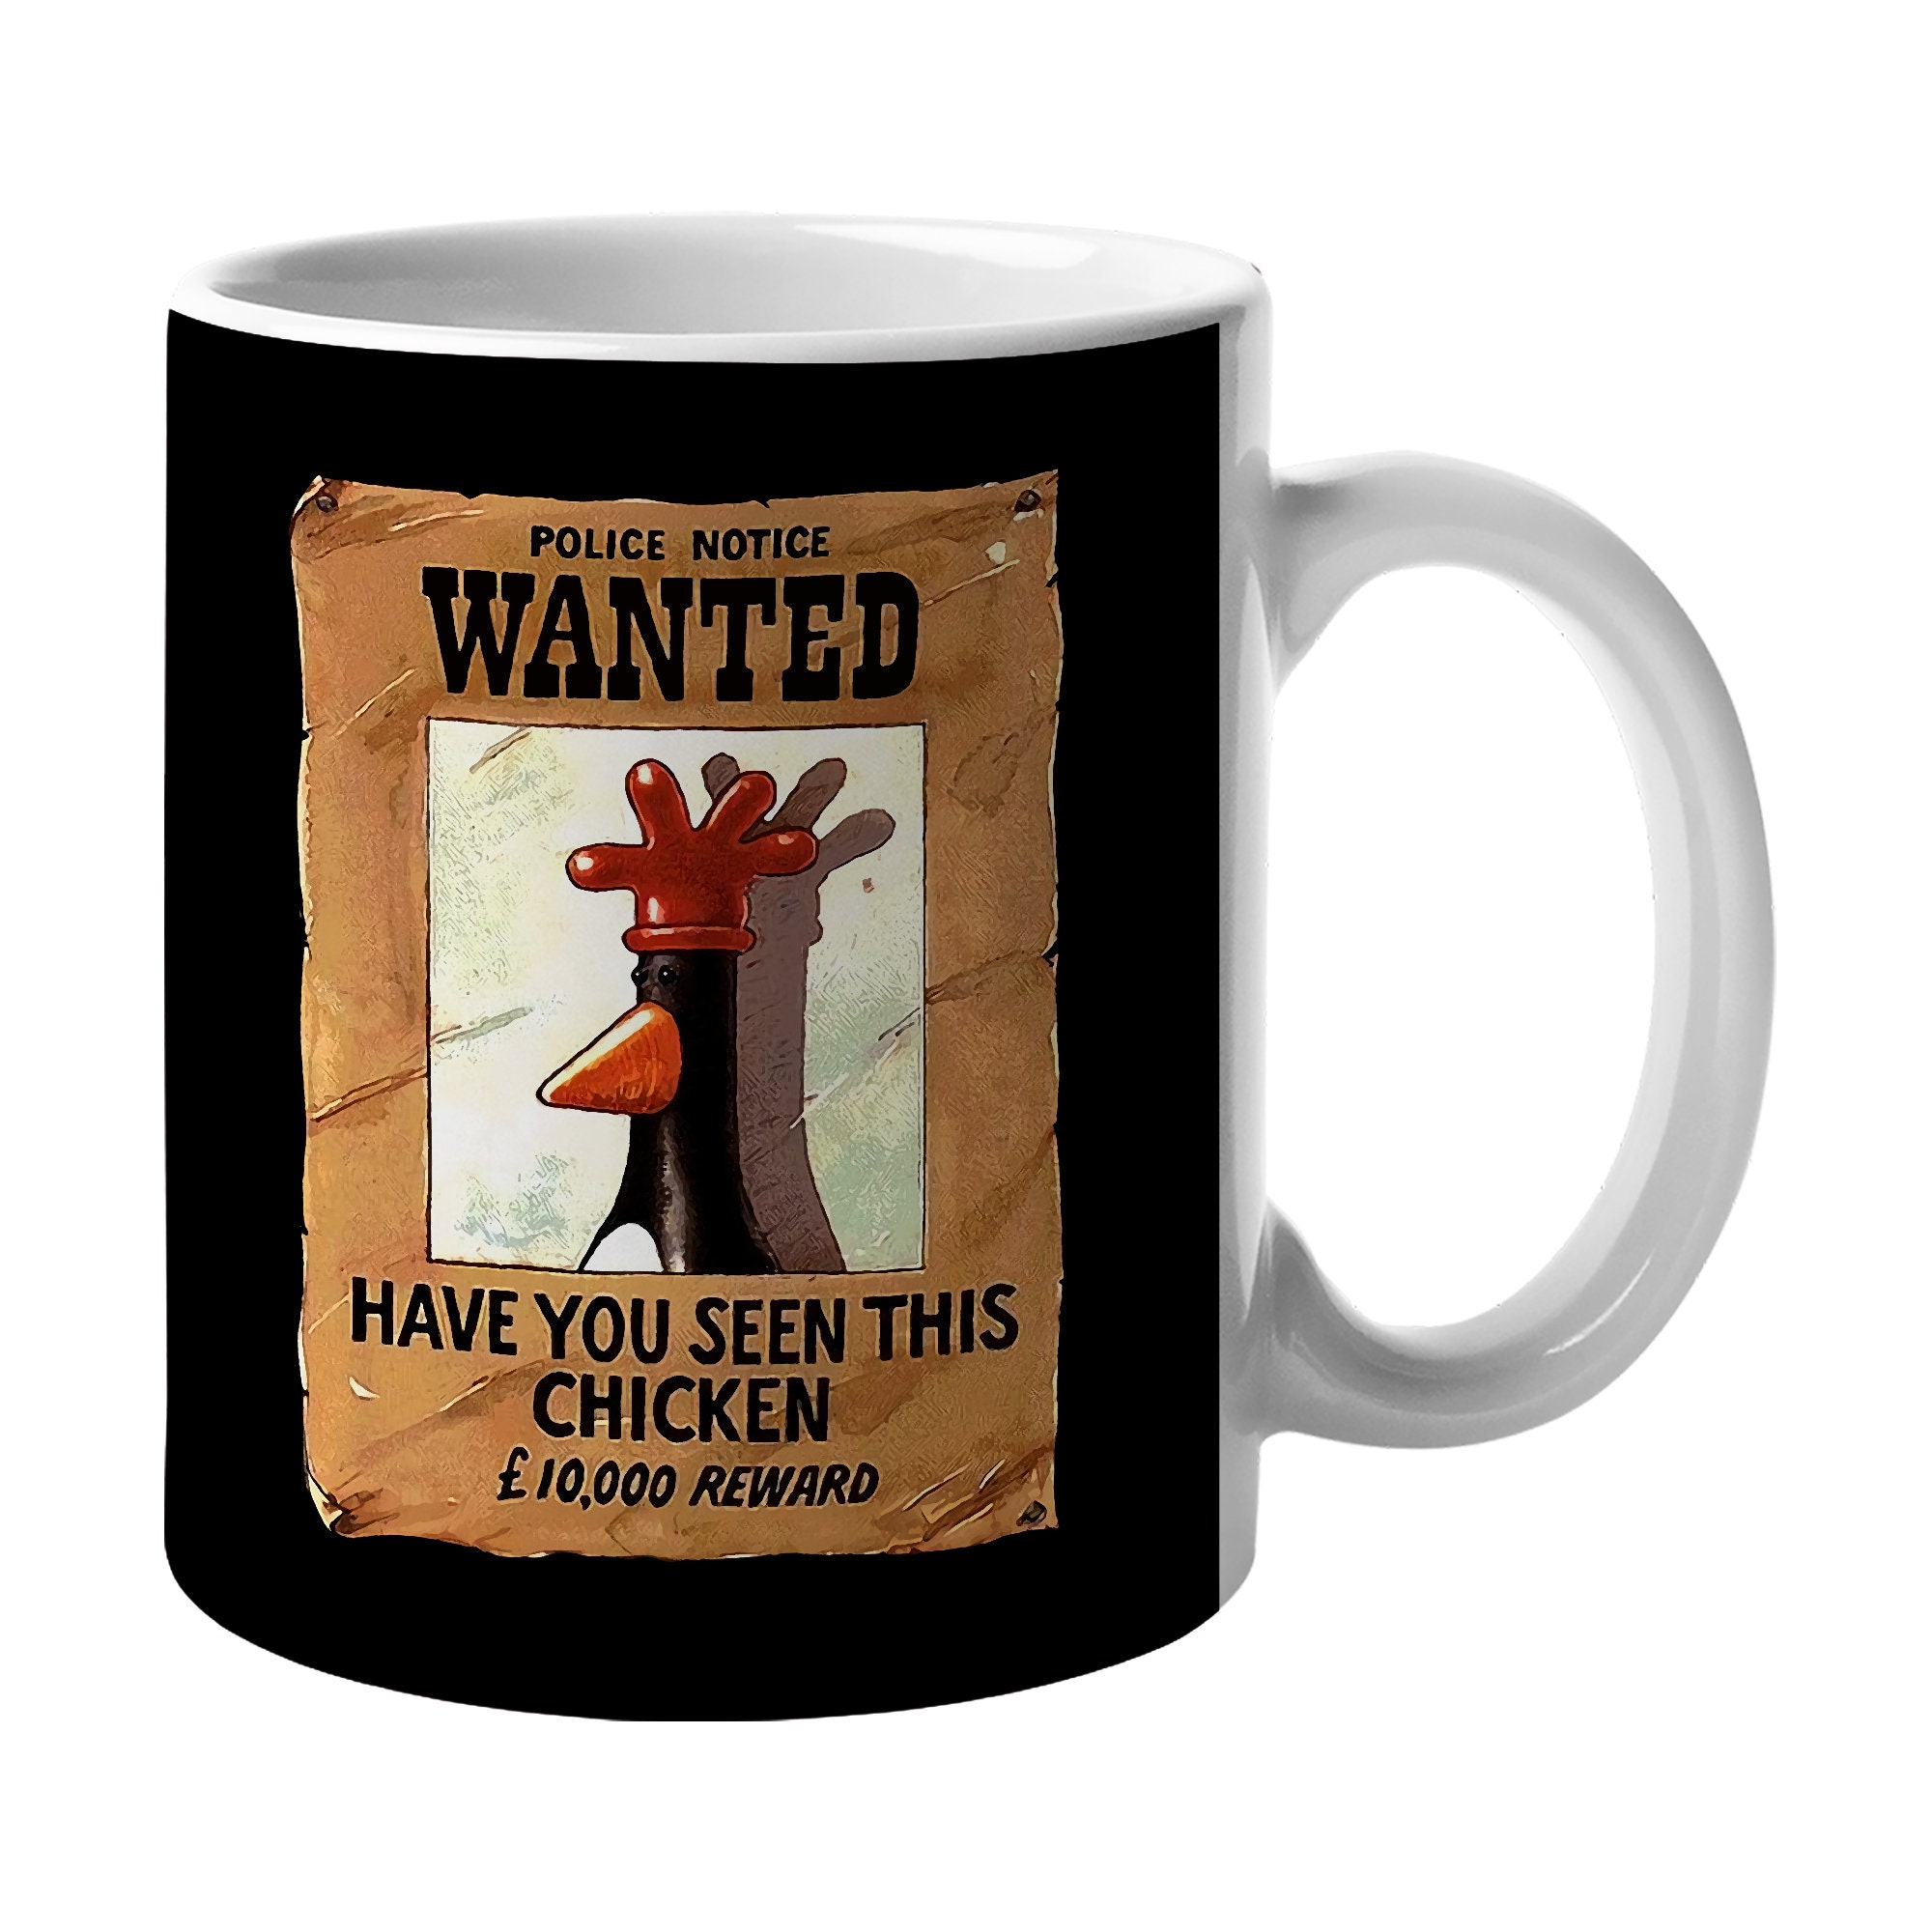 Discover Have You Seen This Chicken Mug Feathers McGraw Wanted poster Coffee Mug